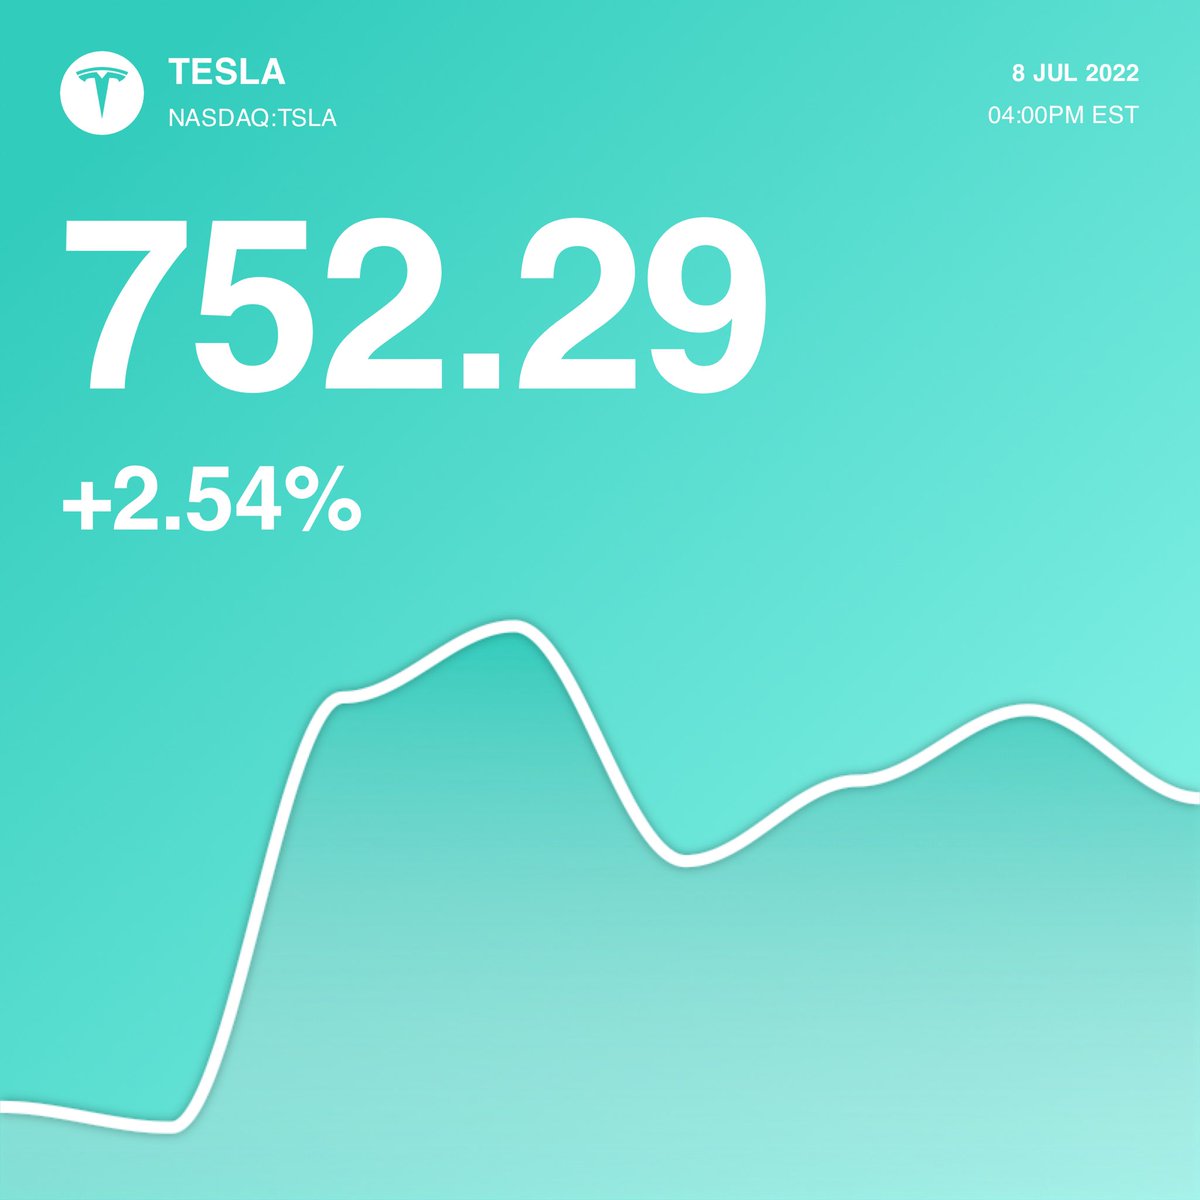 $TSLA 🌈 Rainbow close for the weekend 😀 - Check out this item on OpenSea opensea.io/assets/matic/0… via @opensea